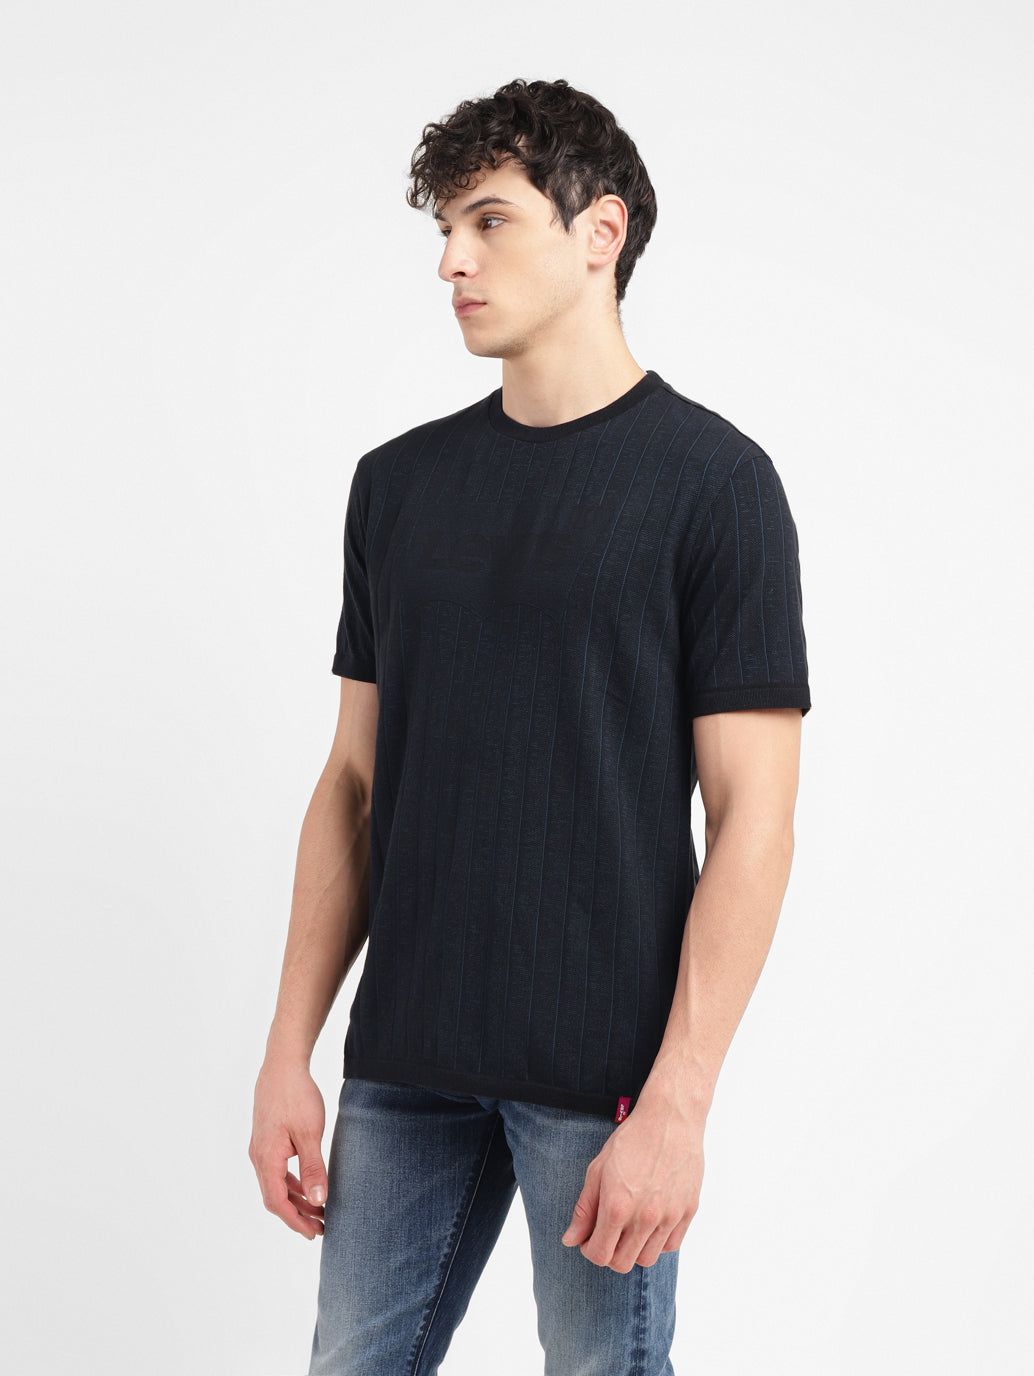 LEVIS SEAMLESS ABSTRACT VERTCAL STRIOPE BATWING TEE A4063-0016 T-SHIRT SHORT SLEEVE (M)